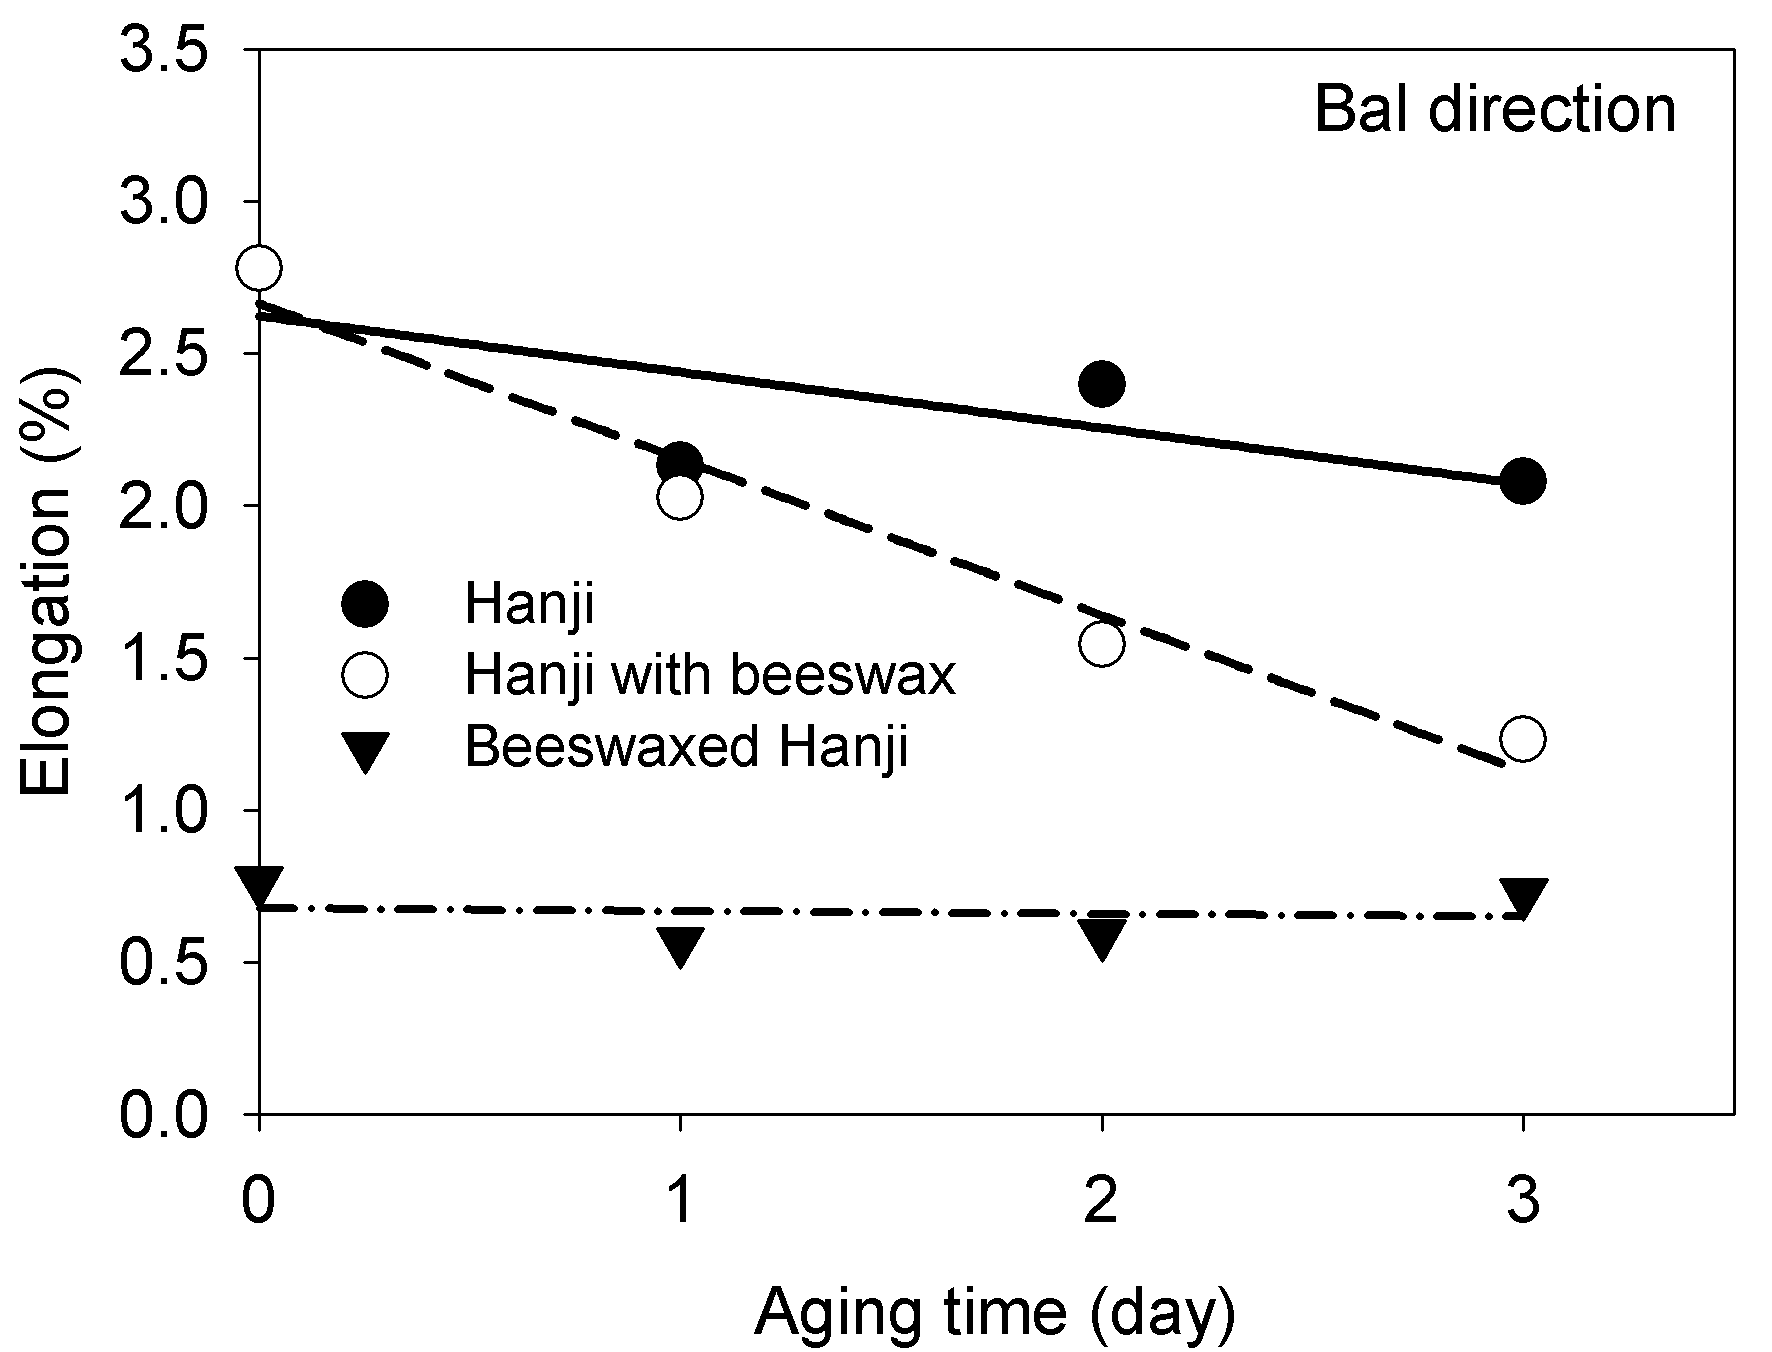 Effect of dry heat aging at 150℃ on elongation of Hanji, Hanji with beeswax and beeswax-treated Hanji in bal direction.